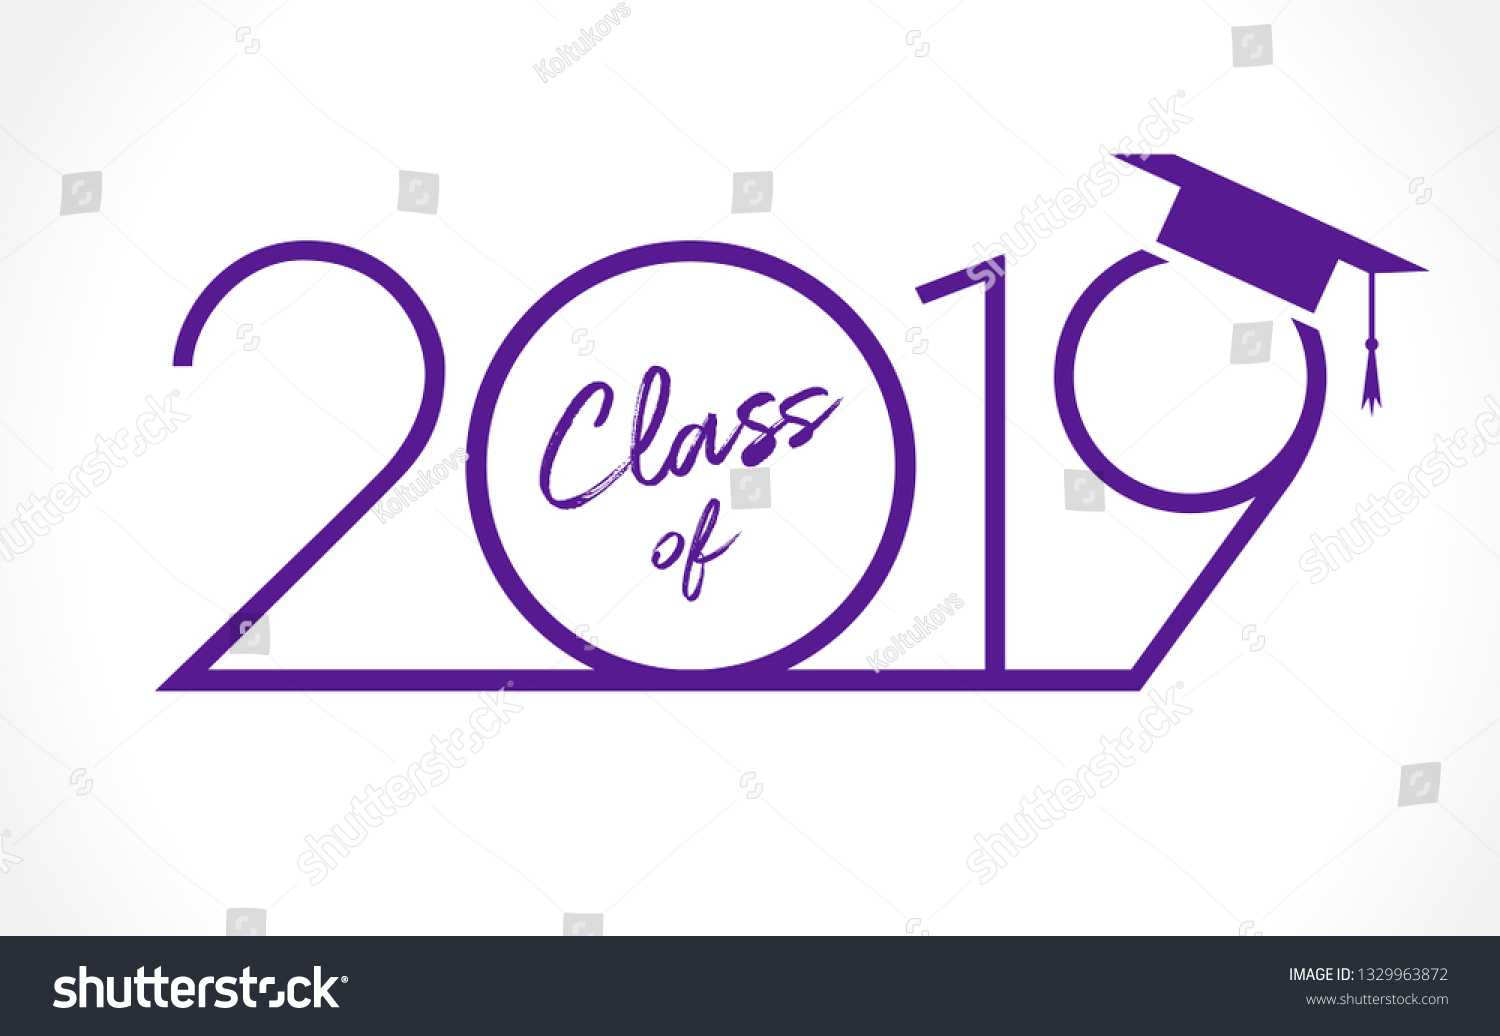 Class 20 19 Year Graduation Banner Stock Vector (Royalty Pertaining To Graduation Banner Template